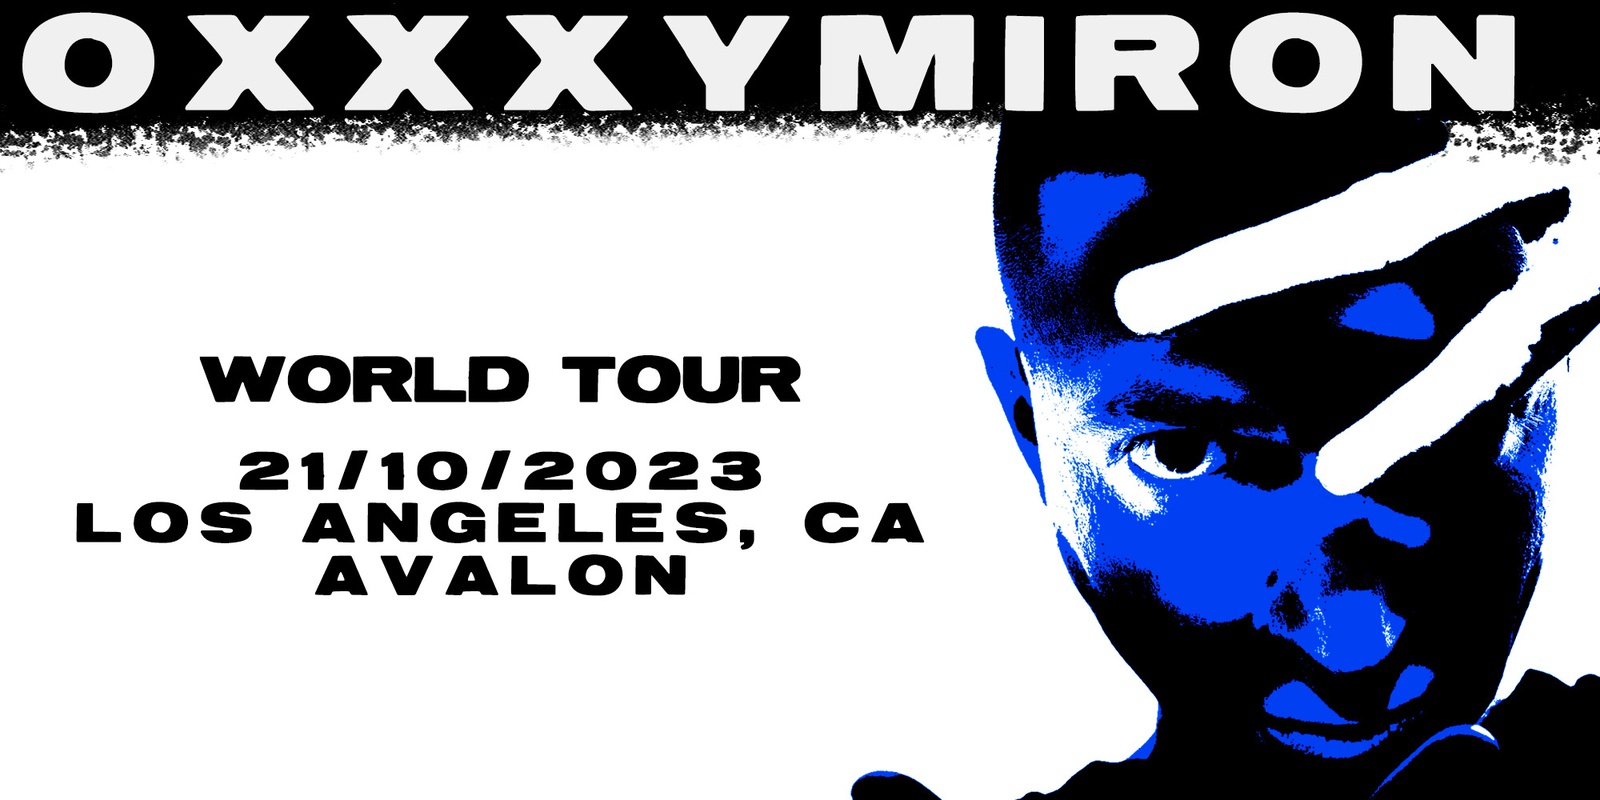 OXXXYMIRON LIVE in Los Angeles